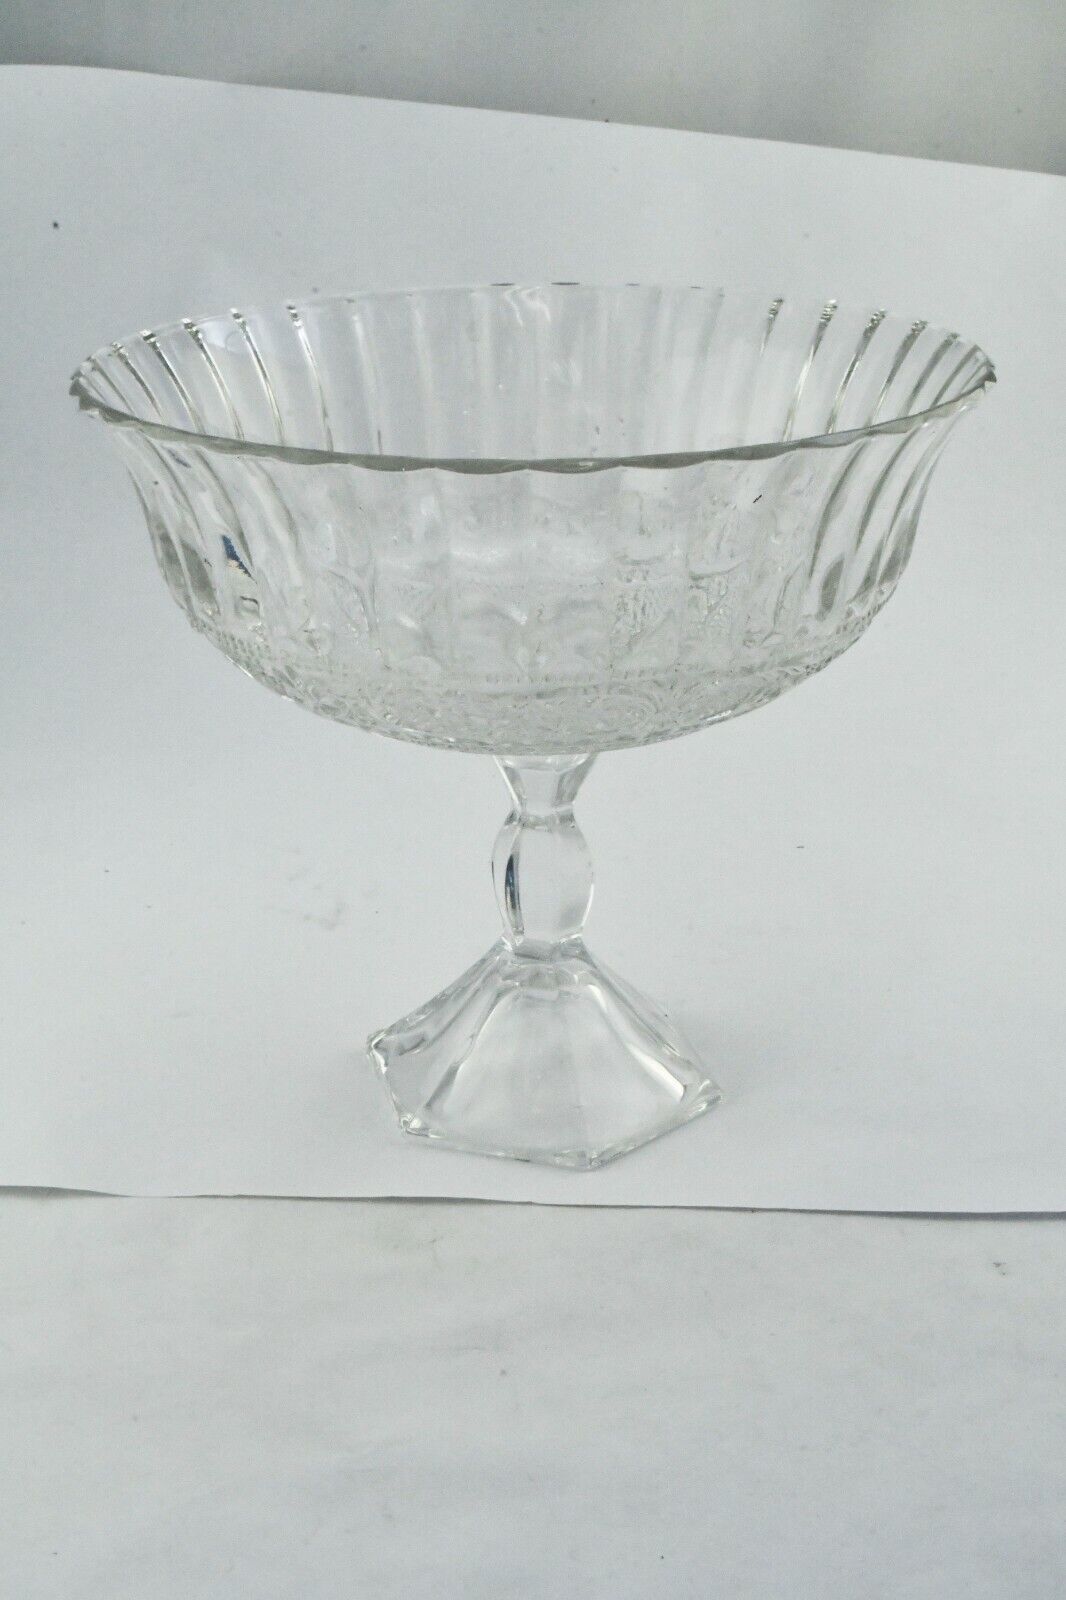 Vintage Style Molded Glass Stemmed Footed Centerpiece Fruit Bowl 6 3/4" Tall